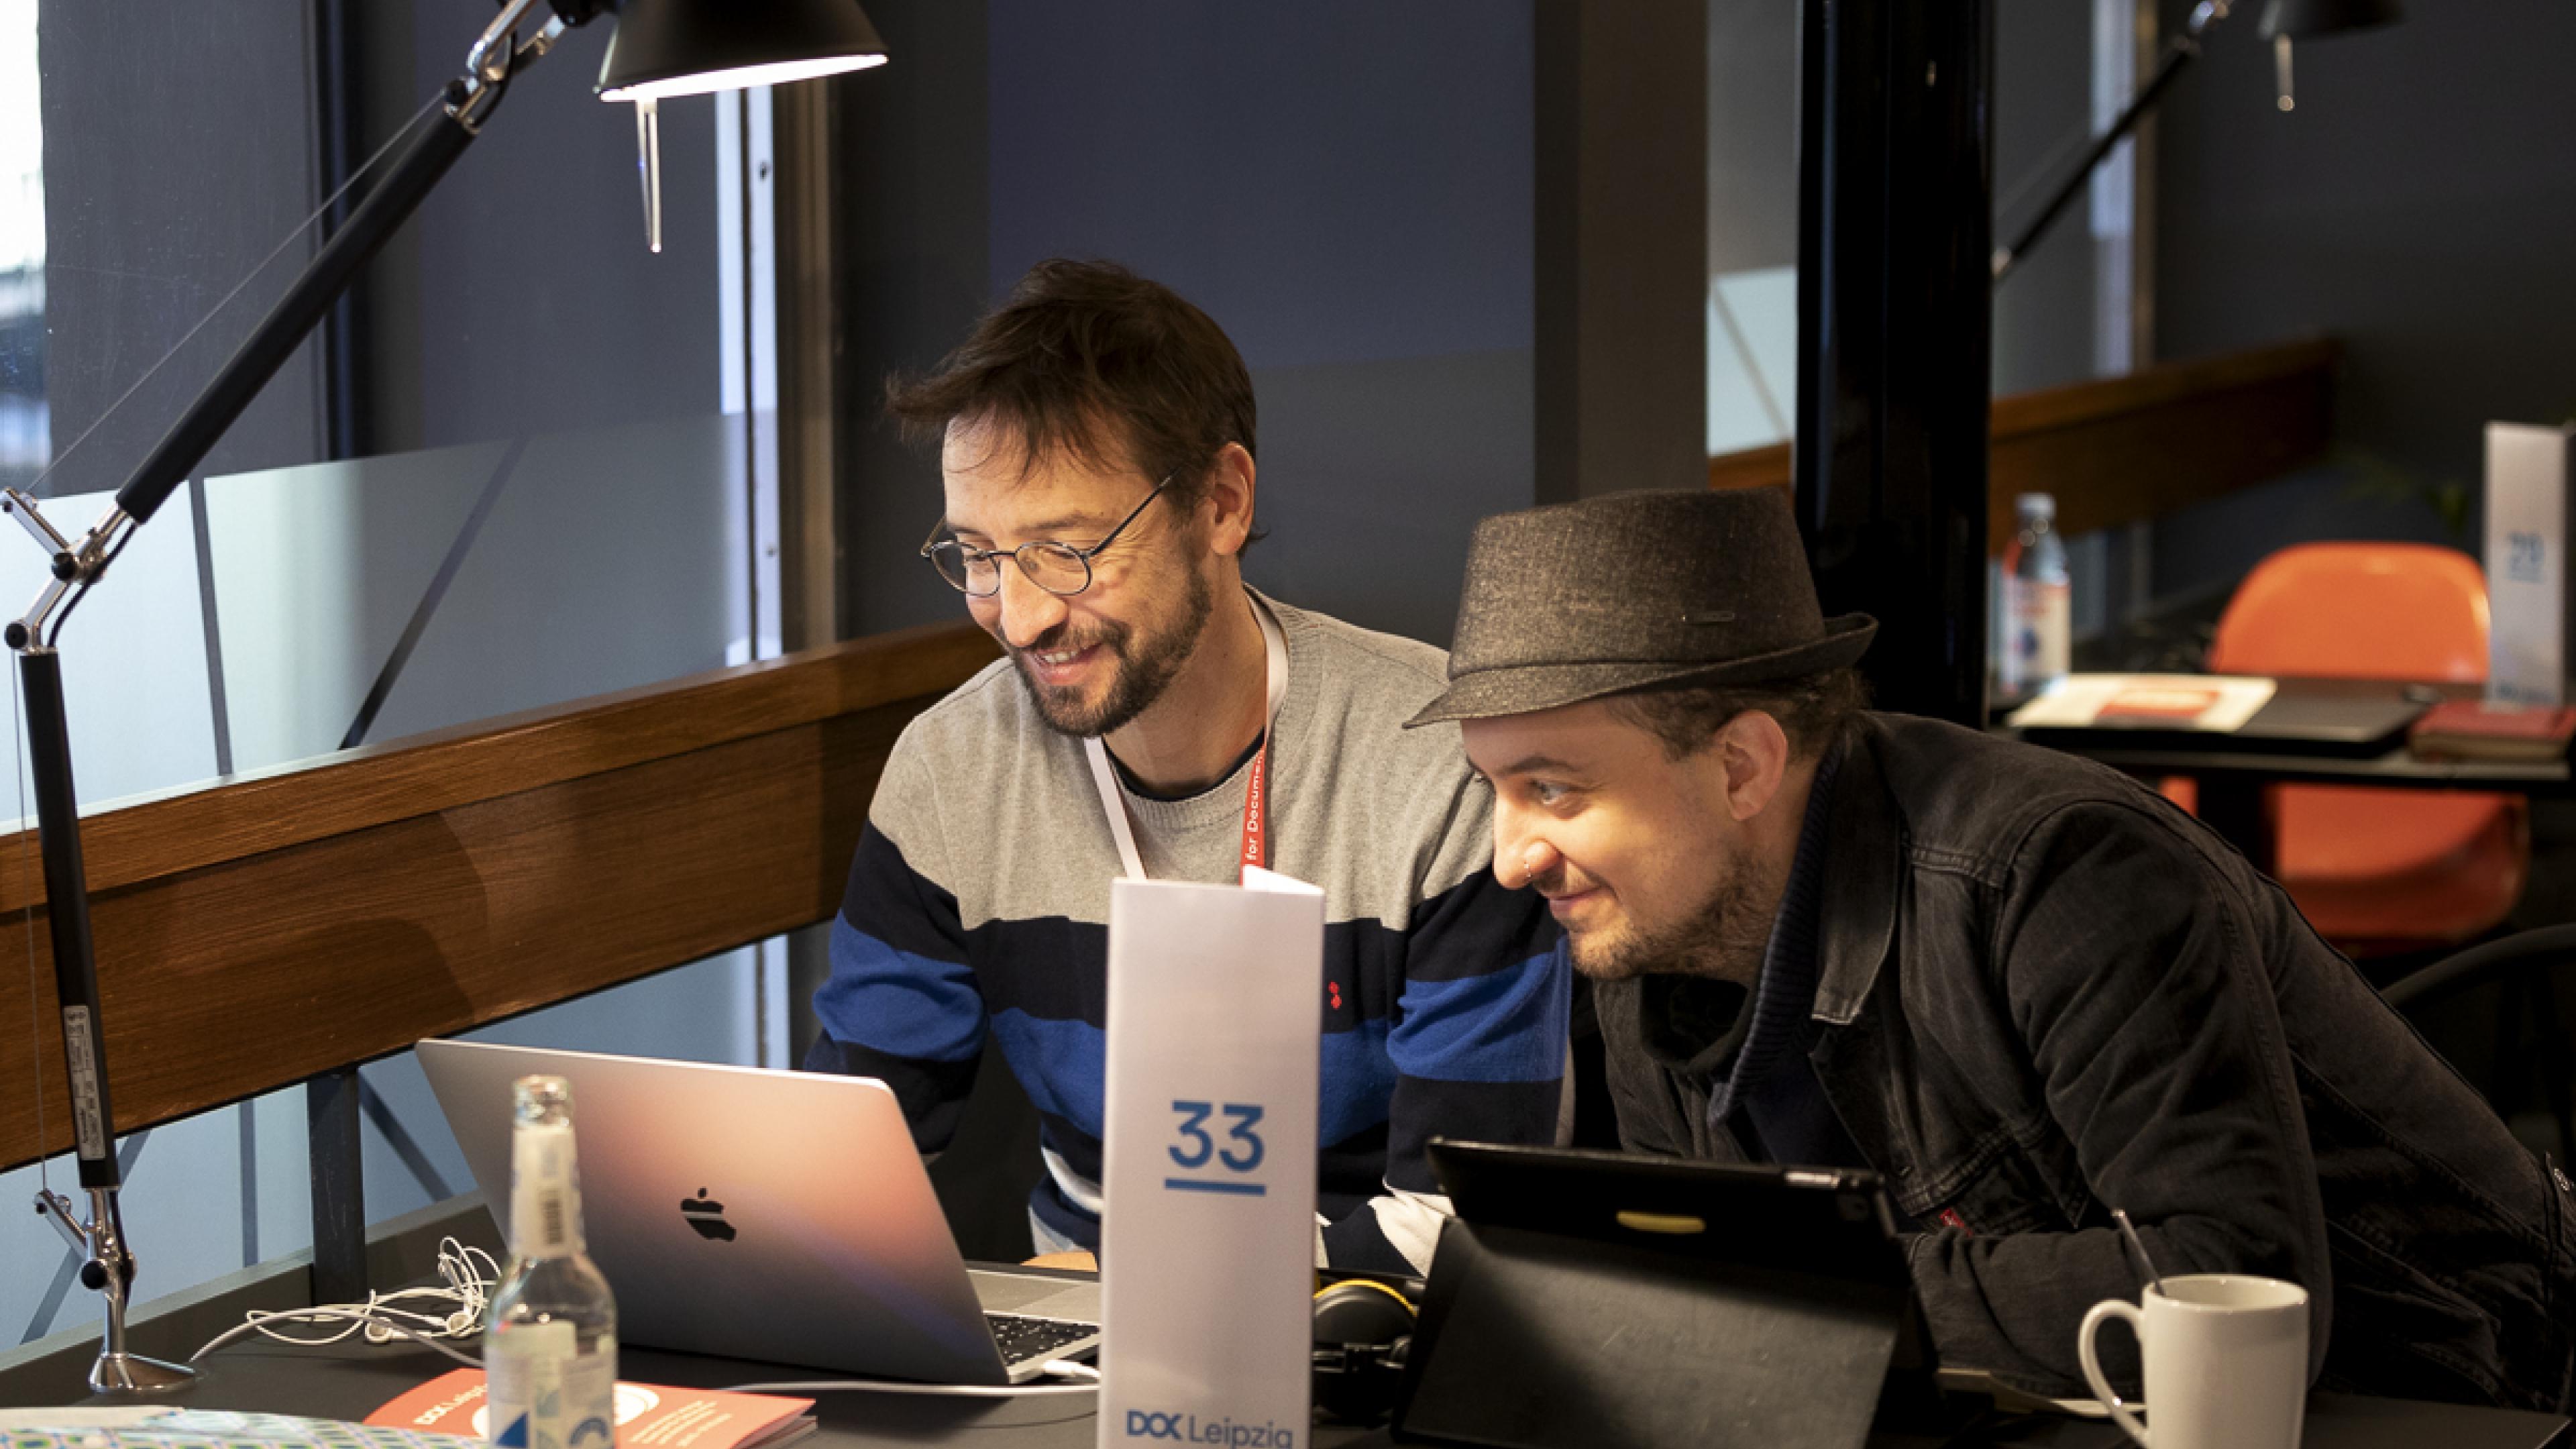 Two male participants of the Co-Pro Market sitting next to each other at a desk, looking at one laptop display. Both are laughing.